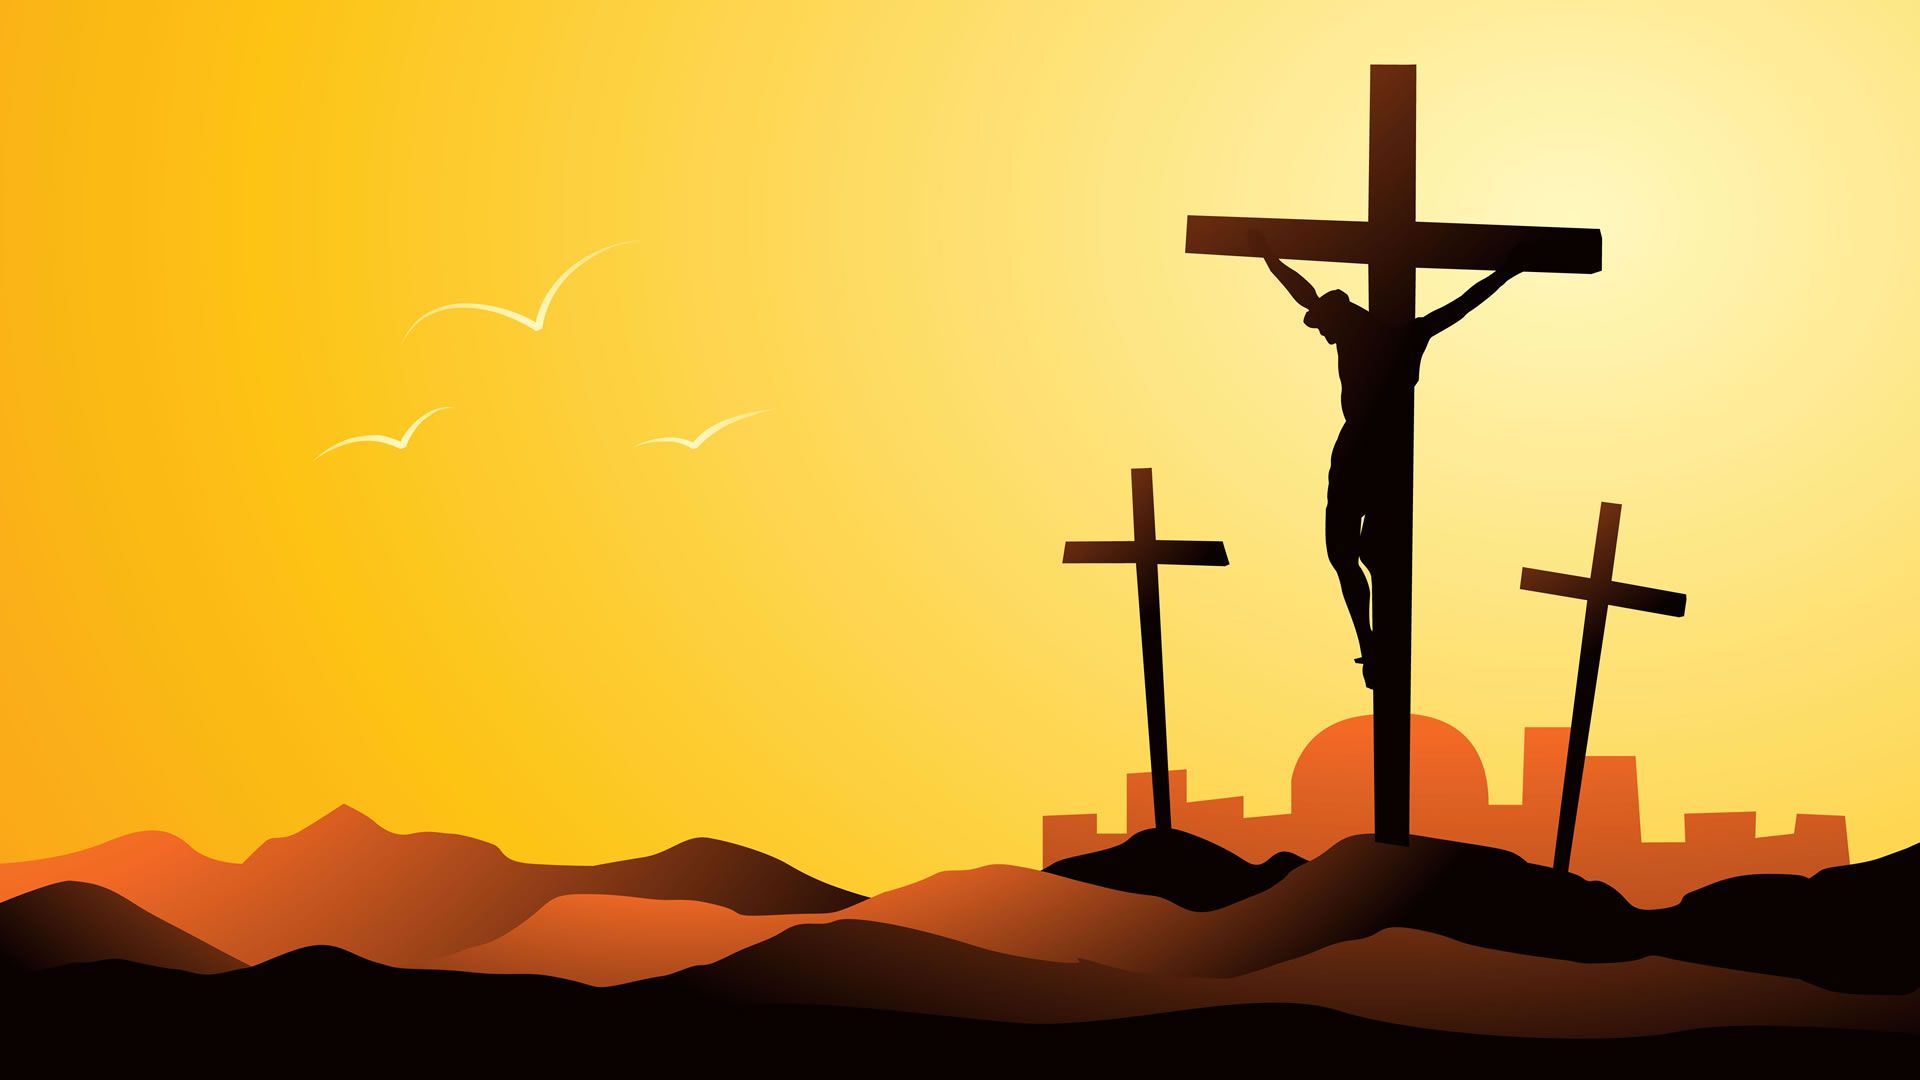 Crucifixion Wallpaper Unique Hdq Images - Jesus Crucified Background - HD Wallpaper 